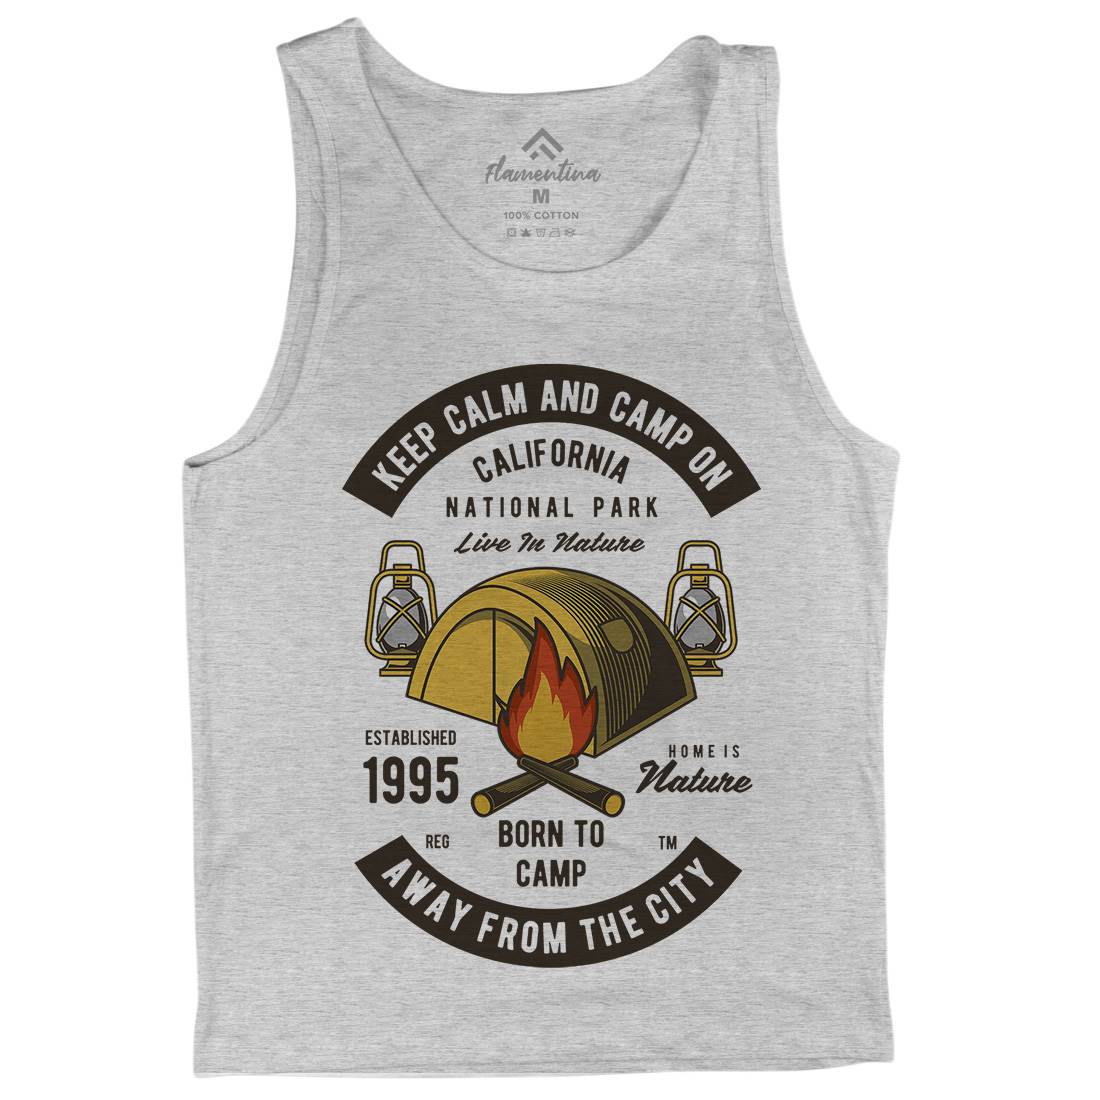 Keep Calm And Camp Mens Tank Top Vest Nature C383